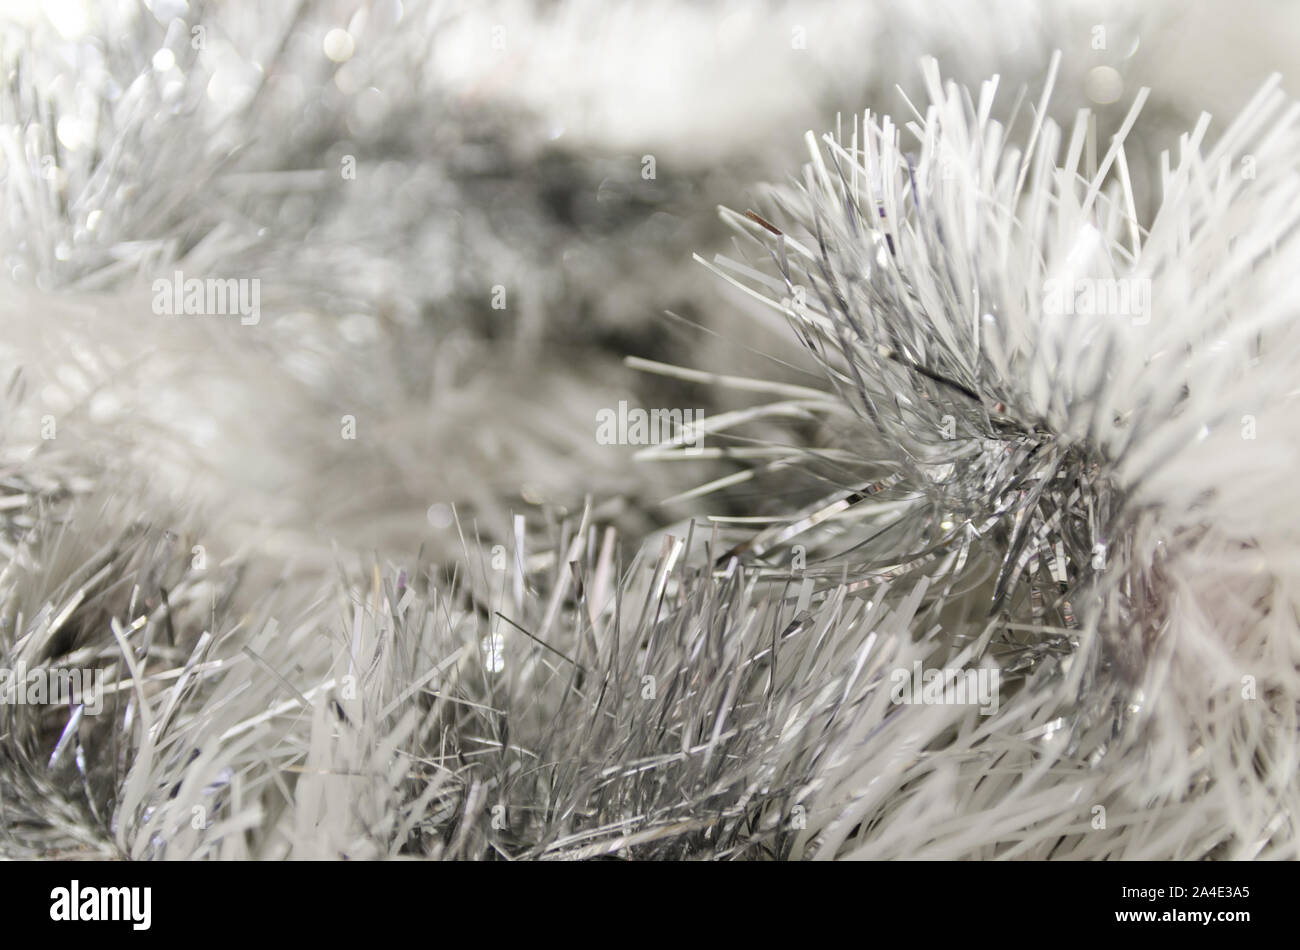 Abstract festive image in silver tone for Christmas or Happy new year background. Close up of hanging holiday tinsel garland. Stock Photo